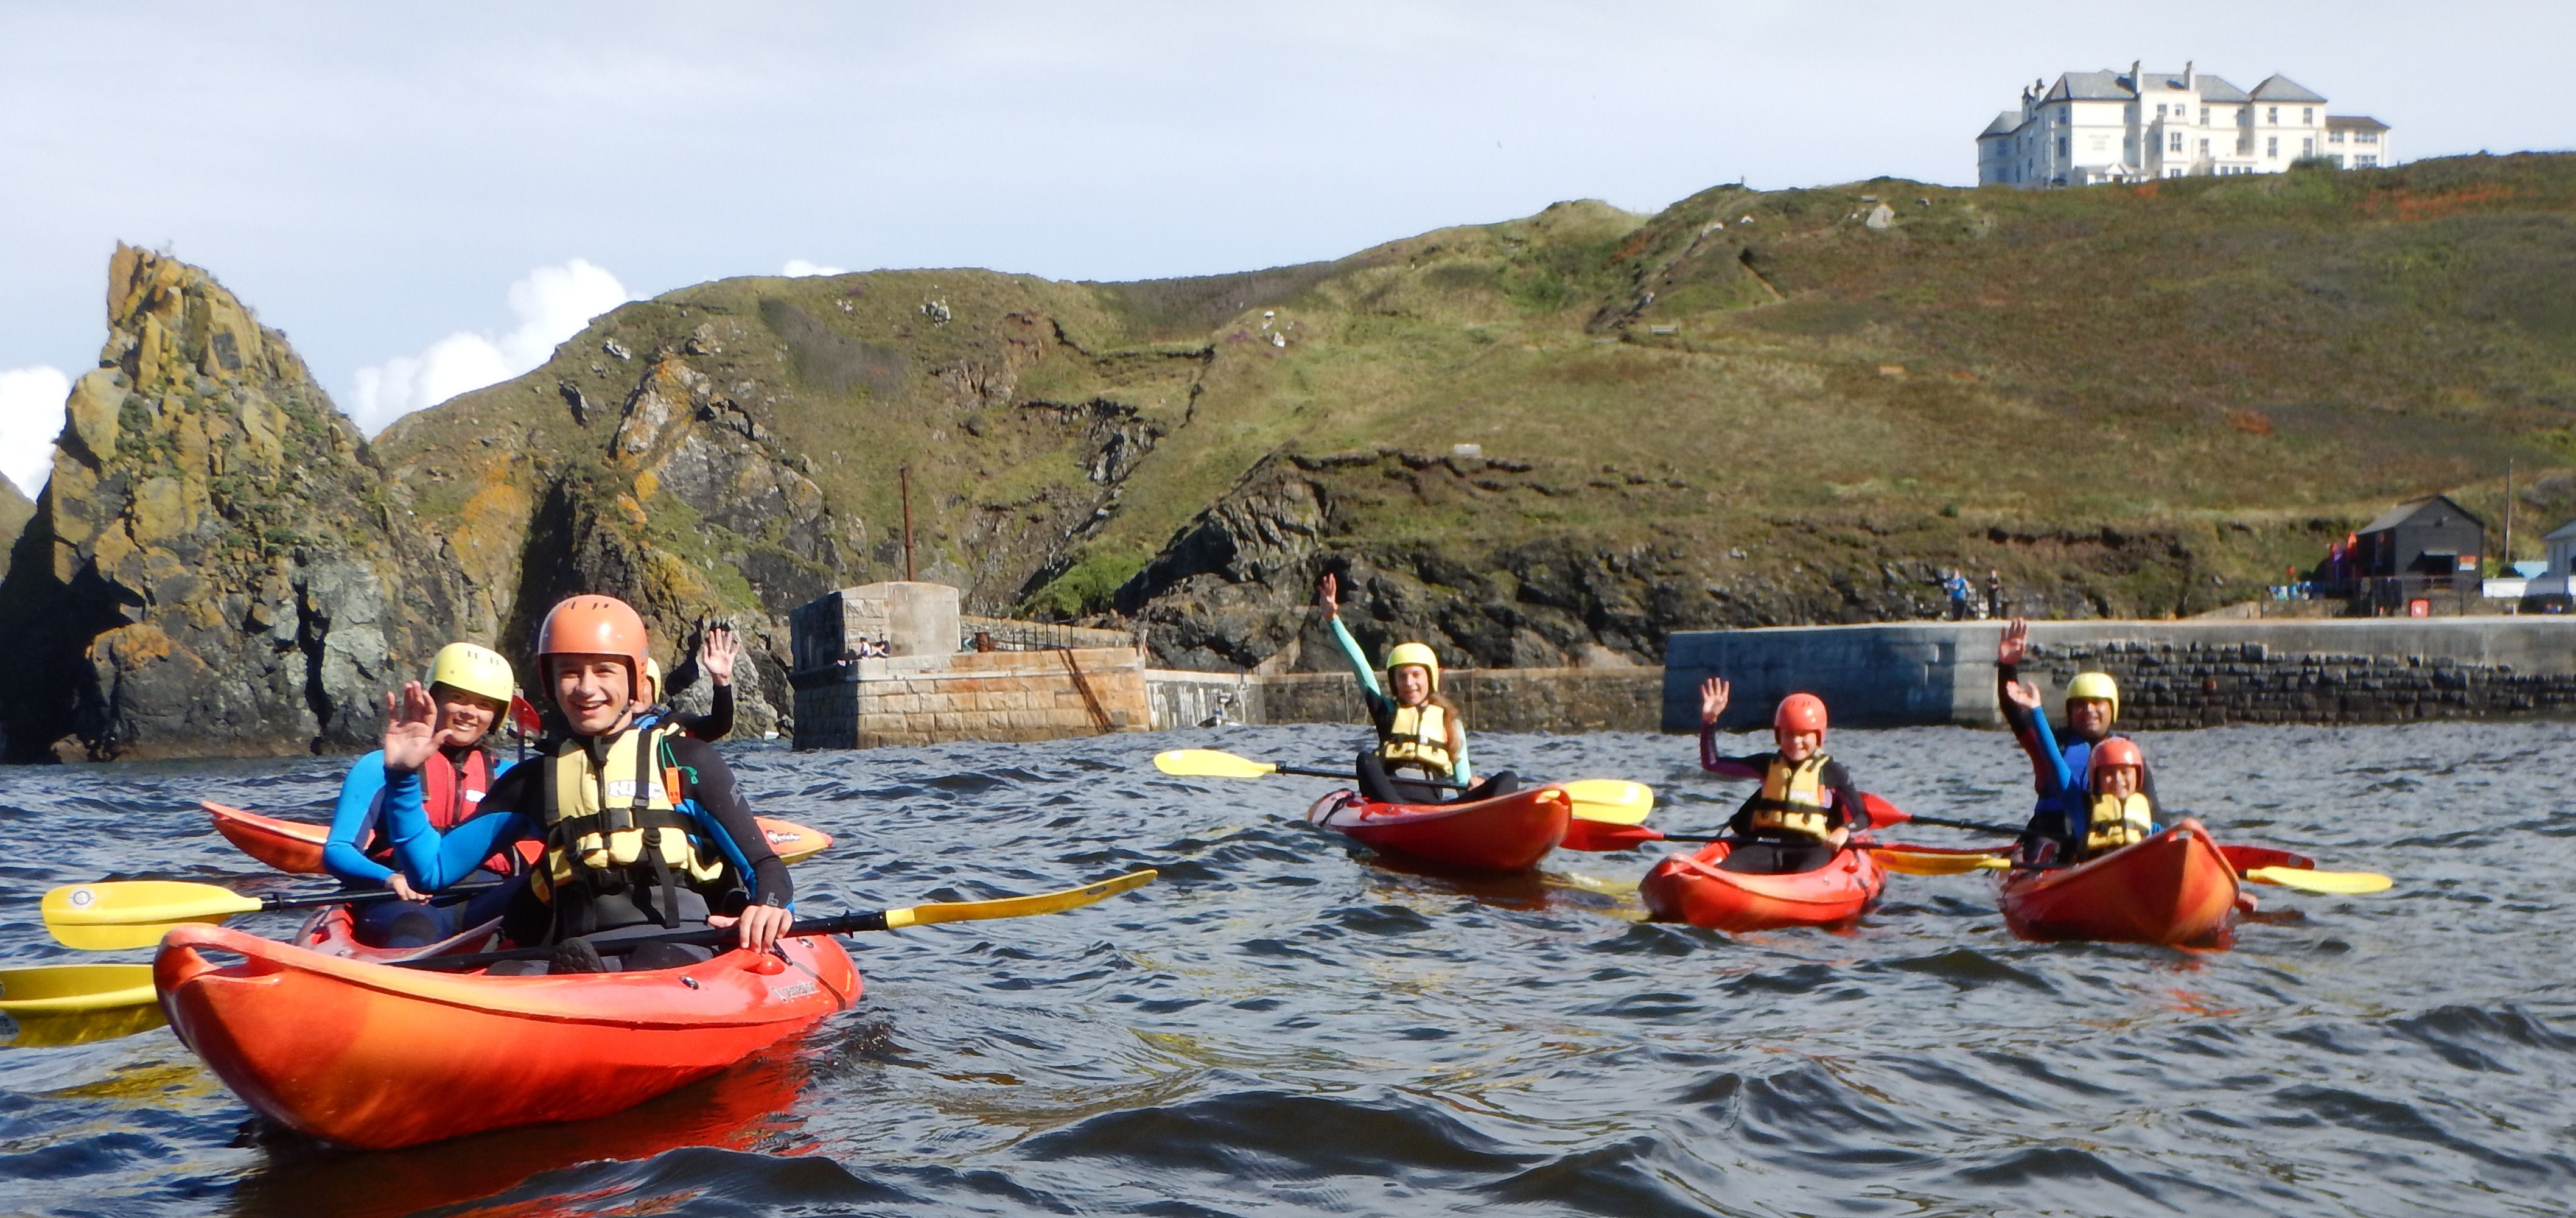 New adventure package at the Mullion Cove Hotel